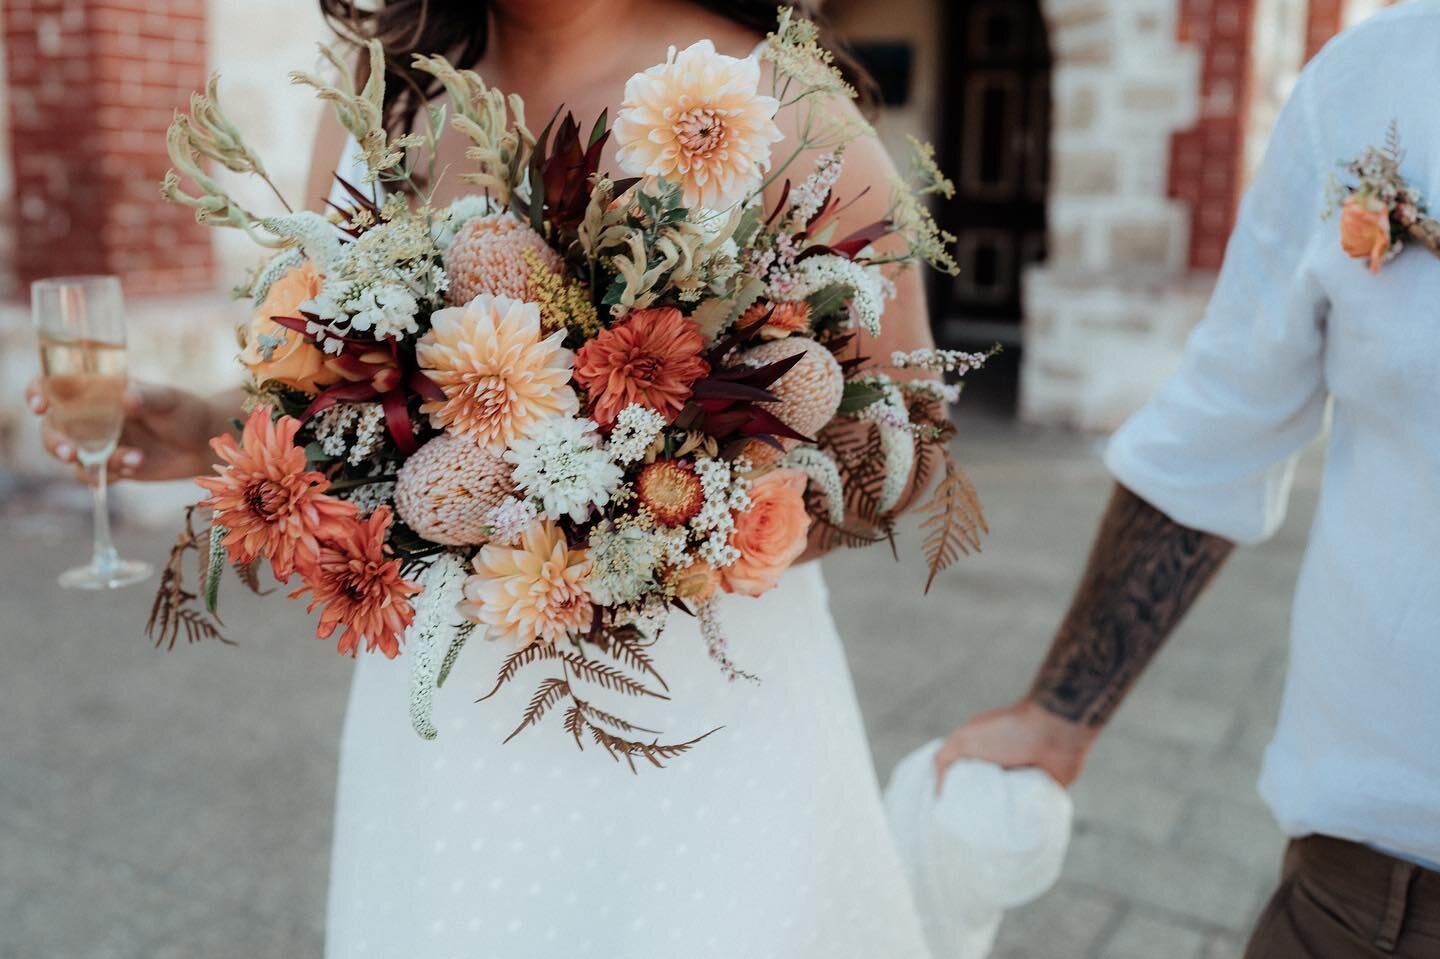 Emma &amp; Colin 🍂

Just taking a moment with this textural beauty created back in February, when the locally grown dahlias were in full force 🏵️

Photo by @wildfeatherscreative 
&bull;
#weddingflowers #weddingflorist #weddingphotography #weddingbo